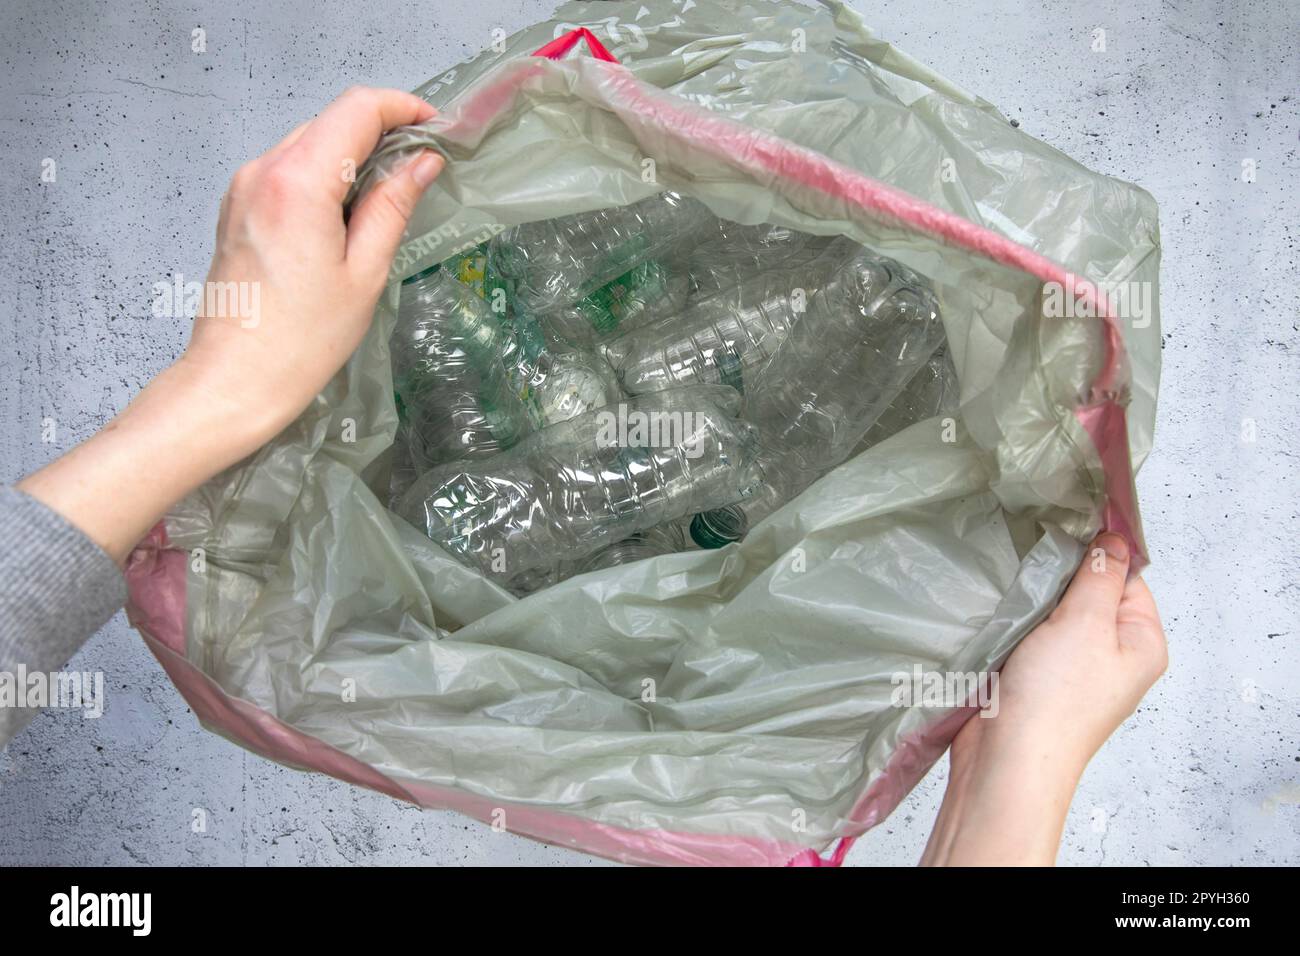 Hand getting plastic bottles to dispose in garbage bag ready to recycle, waste management and plastic recycle. Sorting waste plastic bottles top view Stock Photo